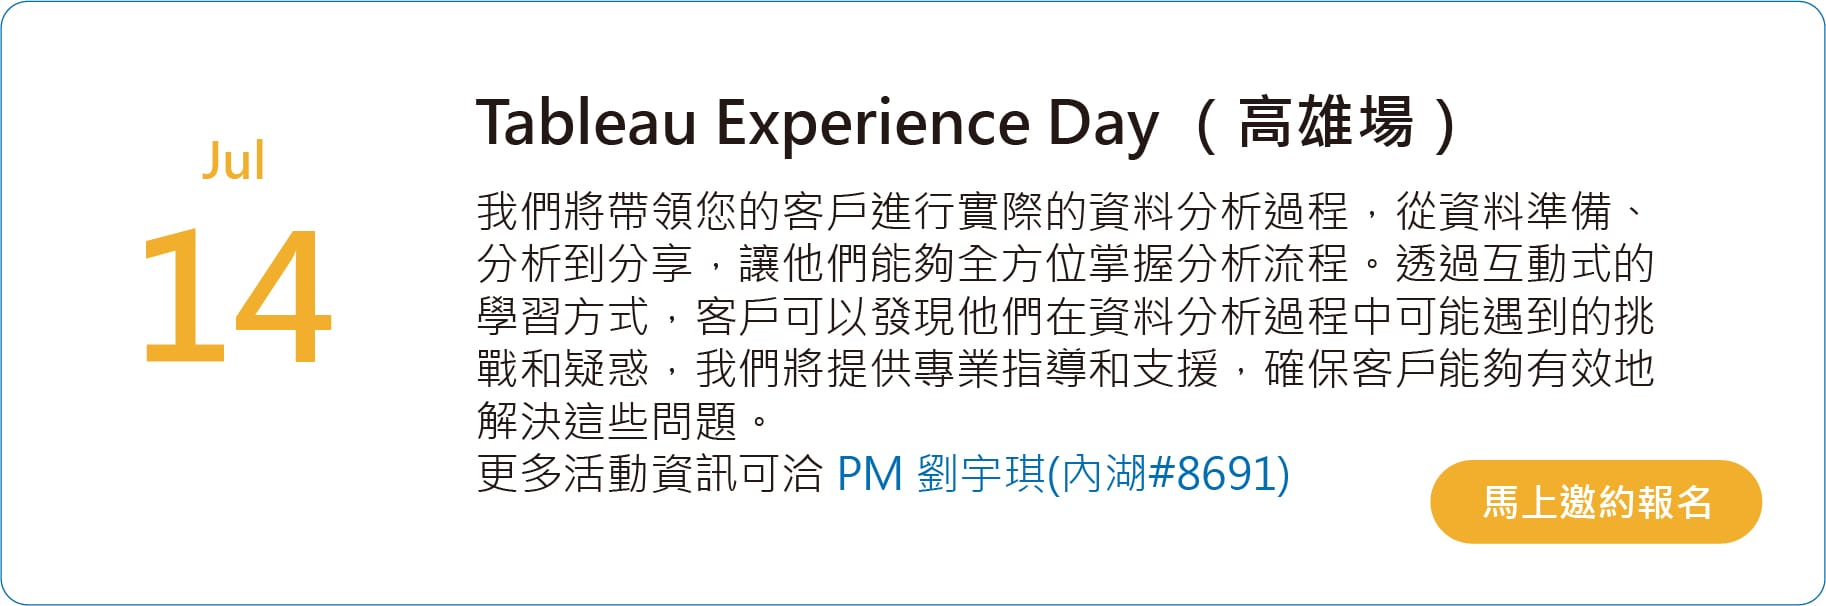 7/14 Tableau Experience Day （高雄場）